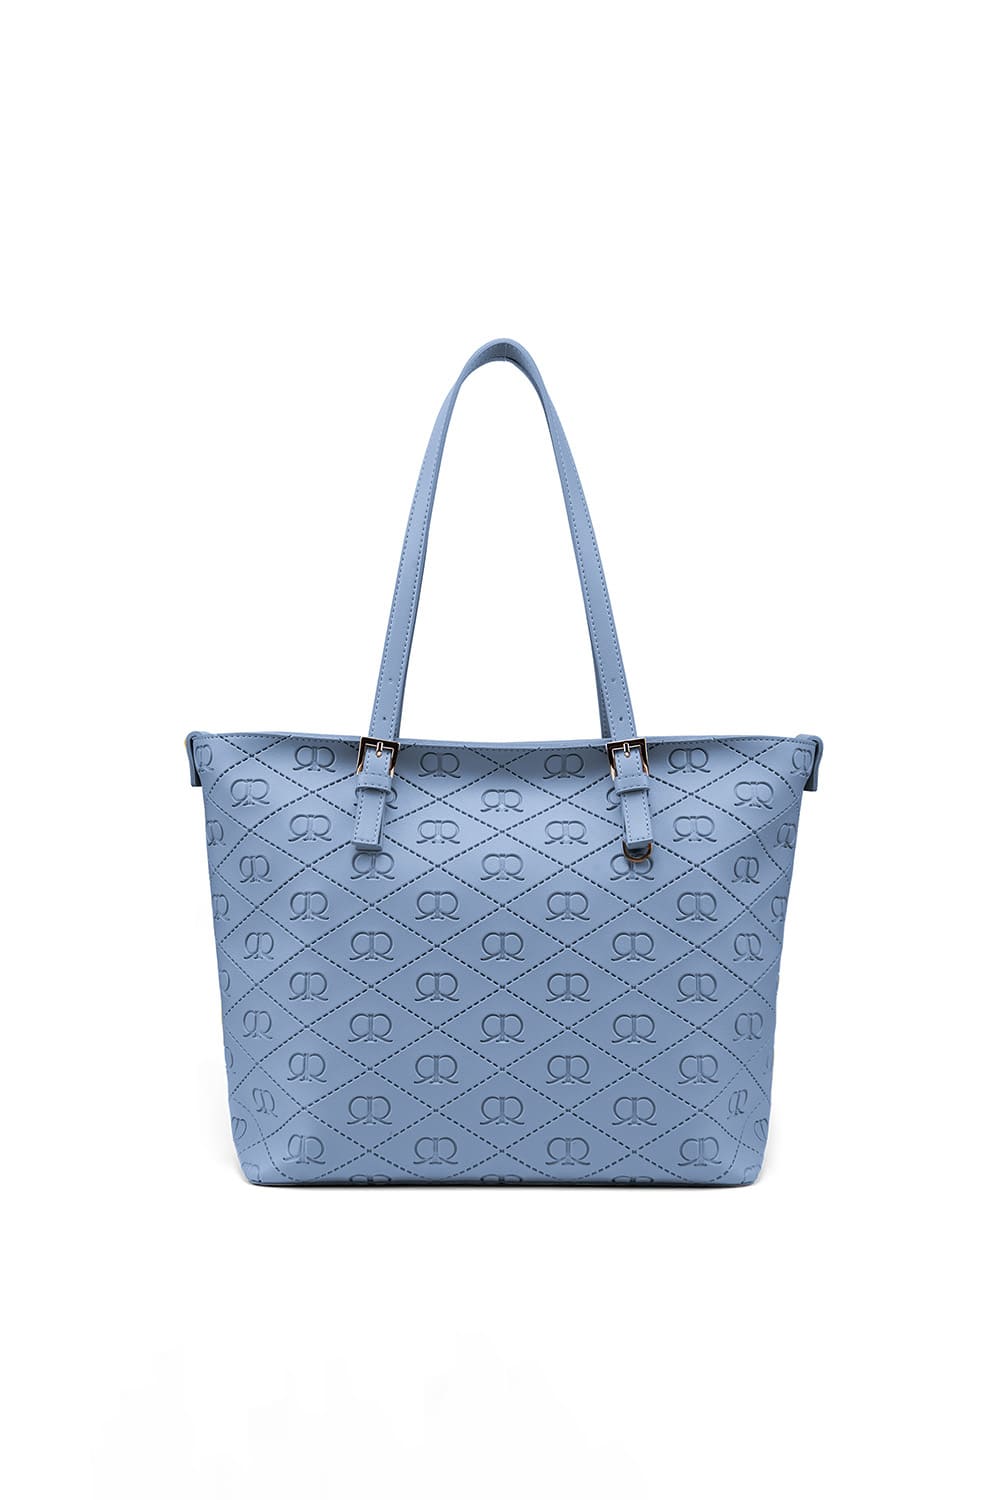 RR Basic Tote in Blue